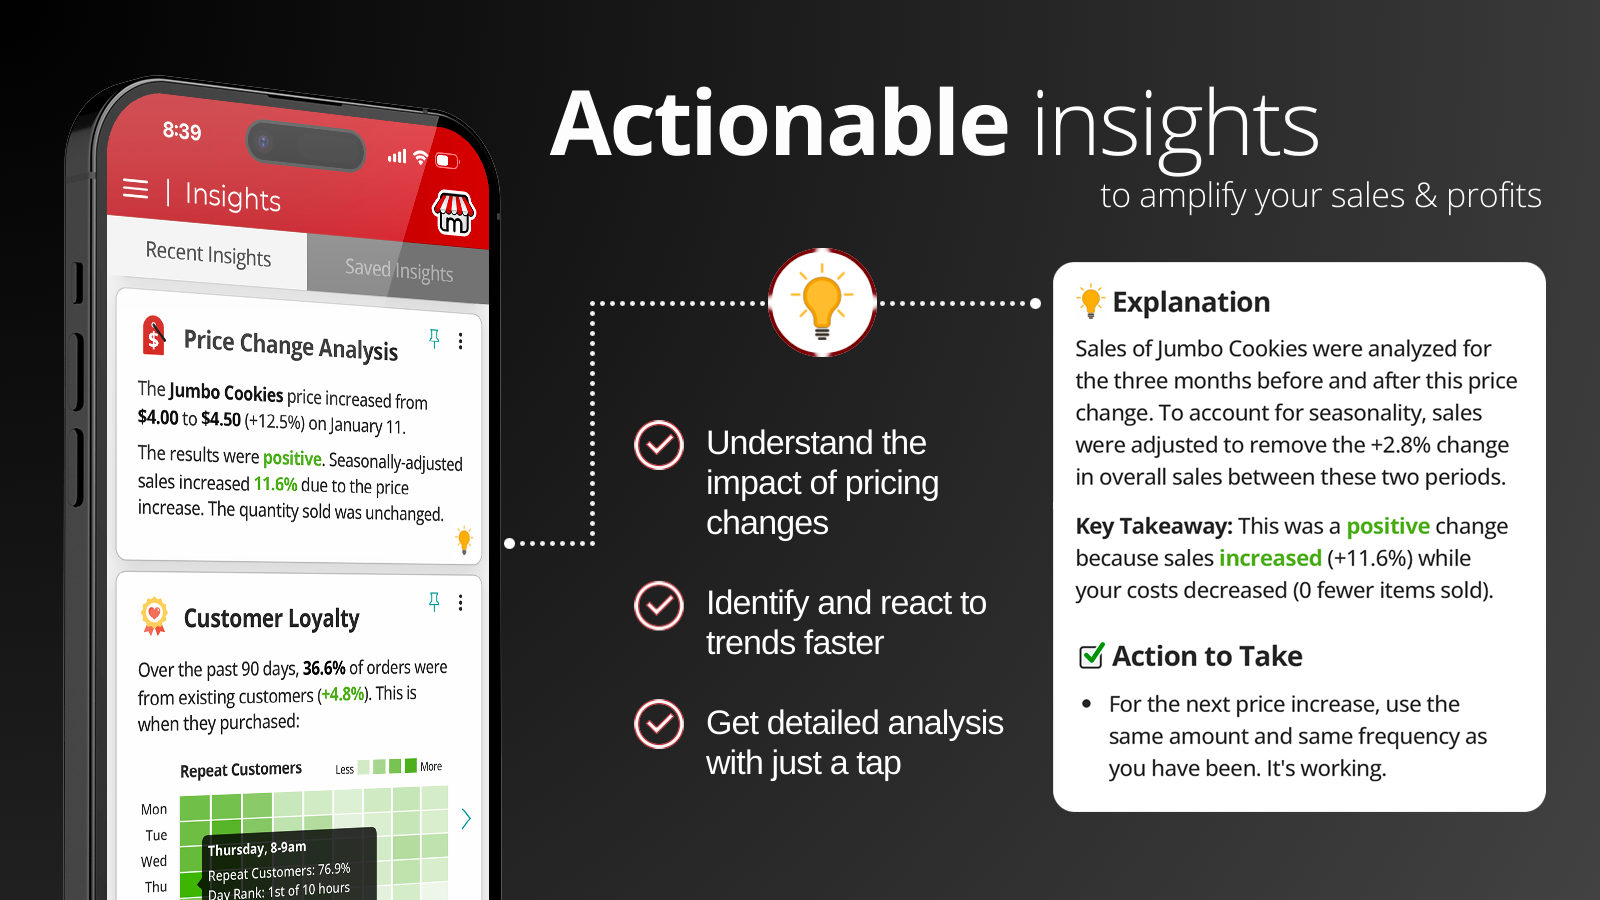 Actionable insights to amplify your sales & profits